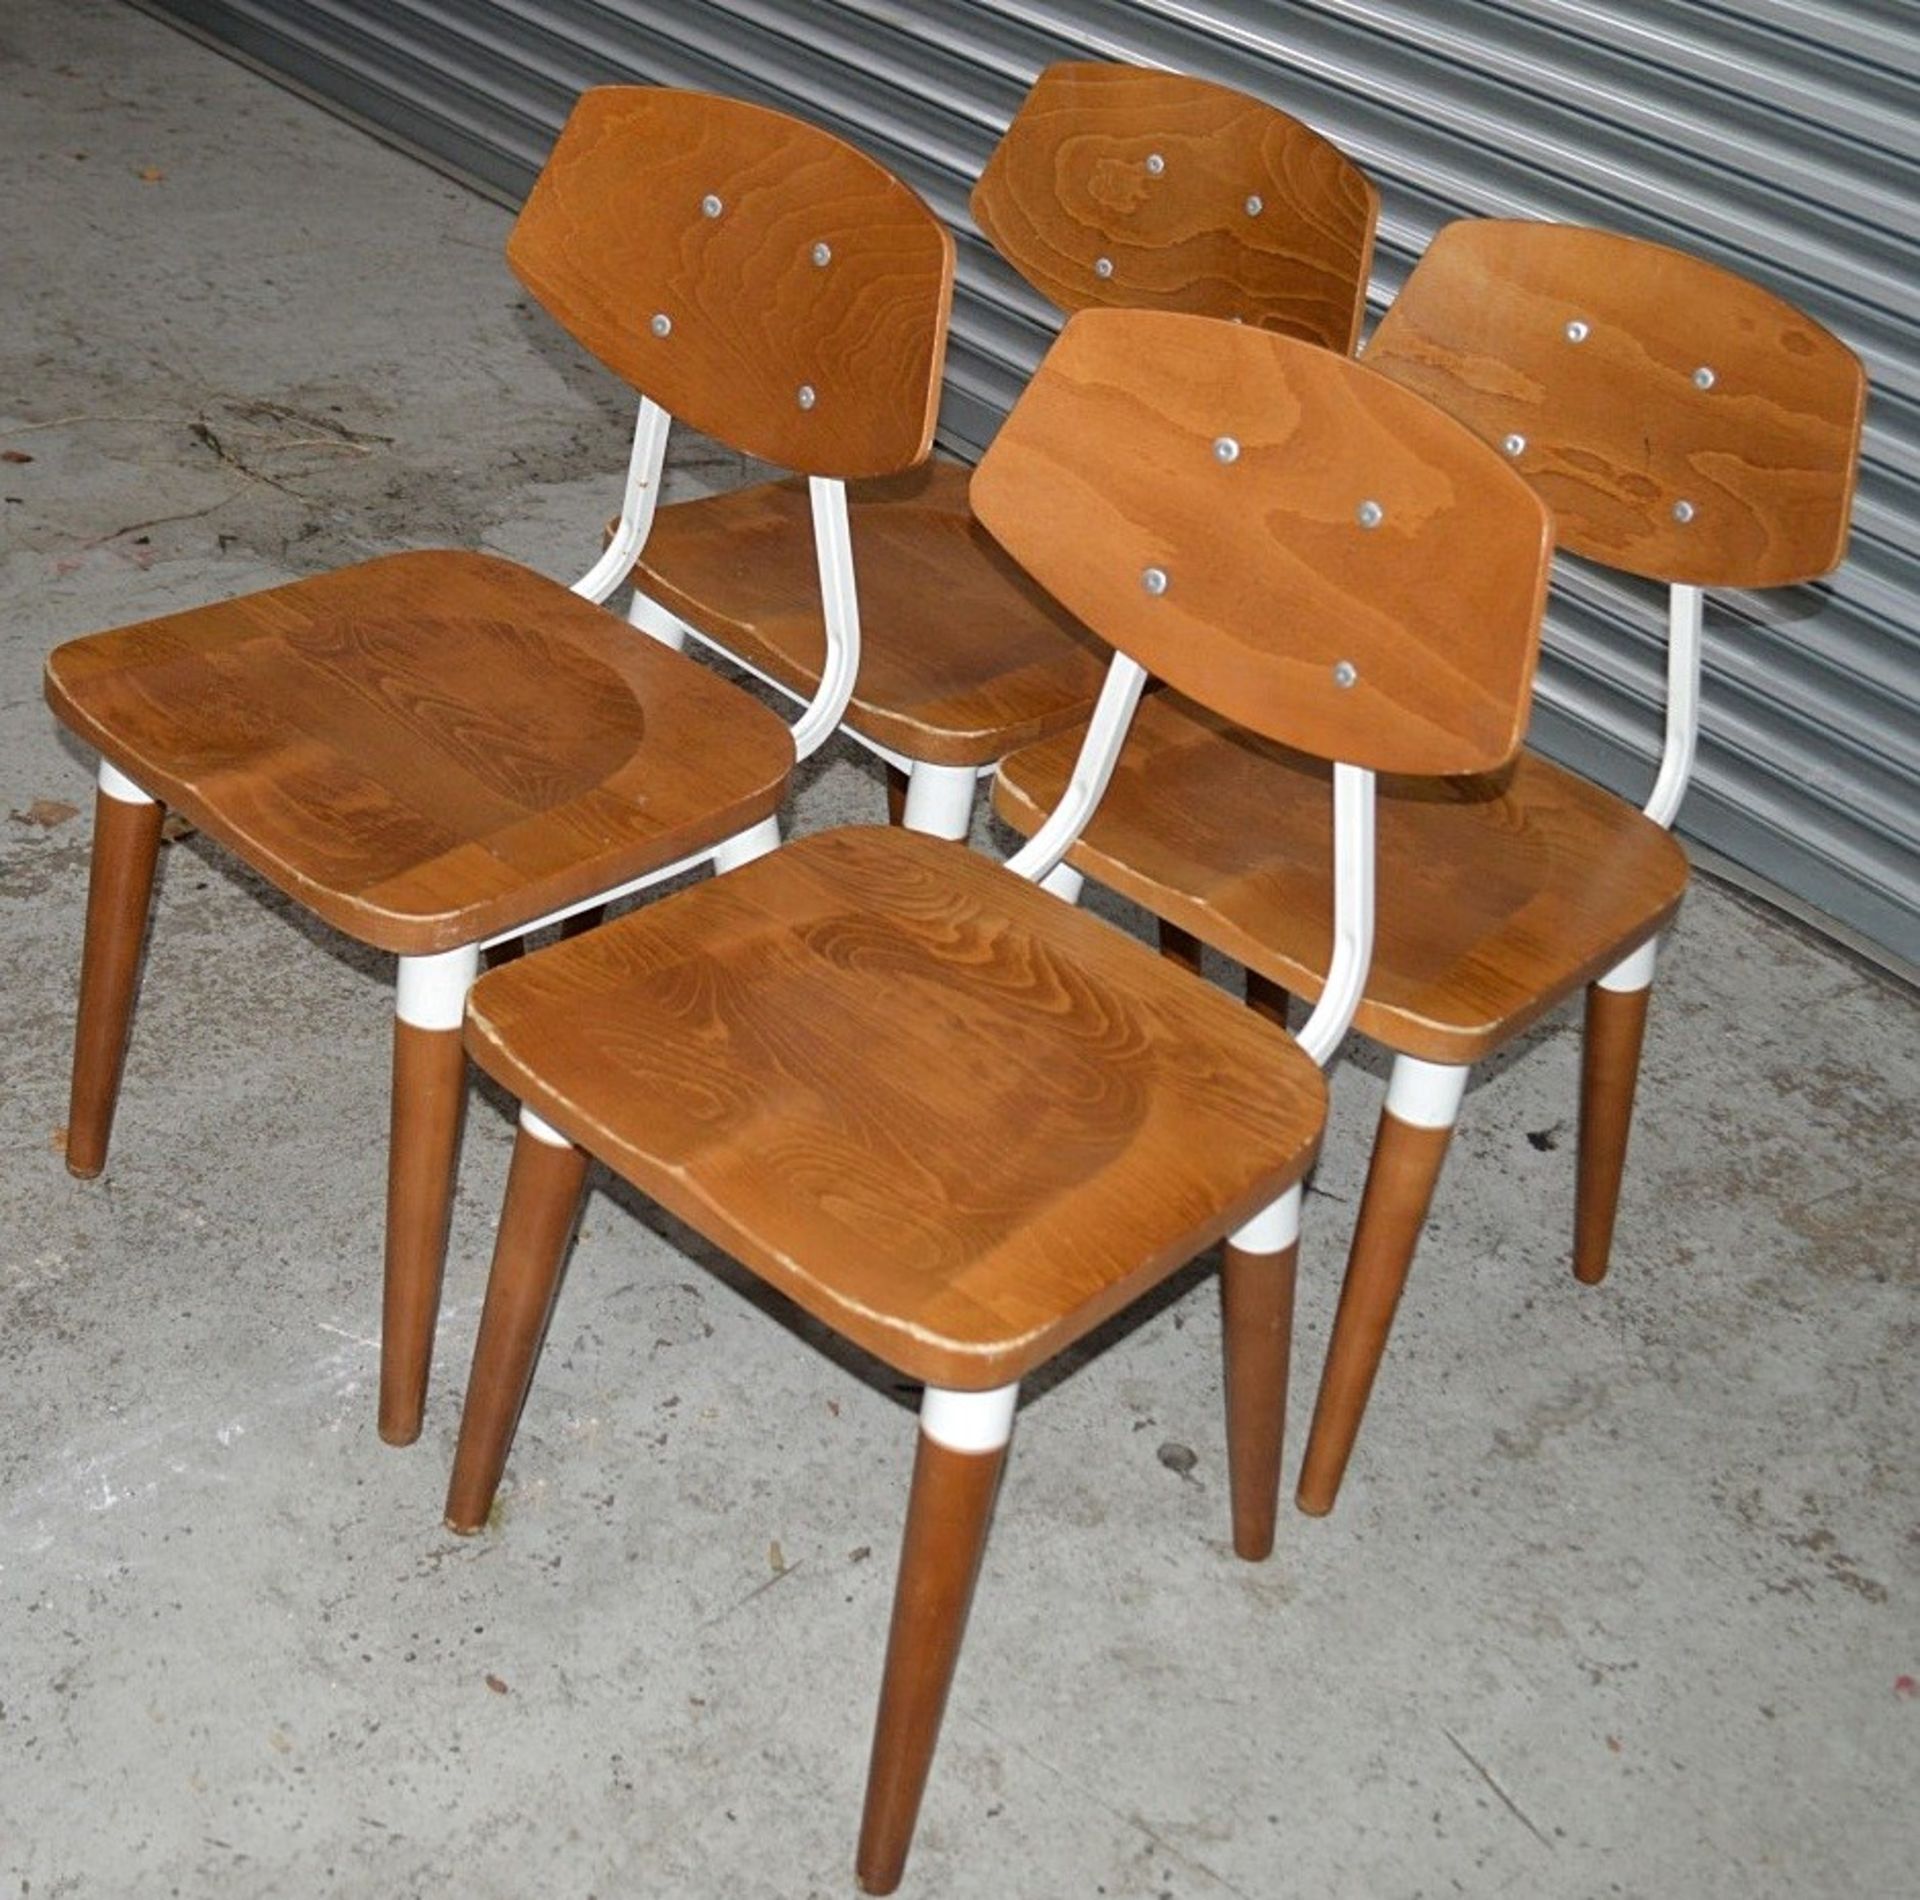 8 x Contemporary Commercial Dining Chairs With A Sturdy Wood And Metal Construction - Image 5 of 10